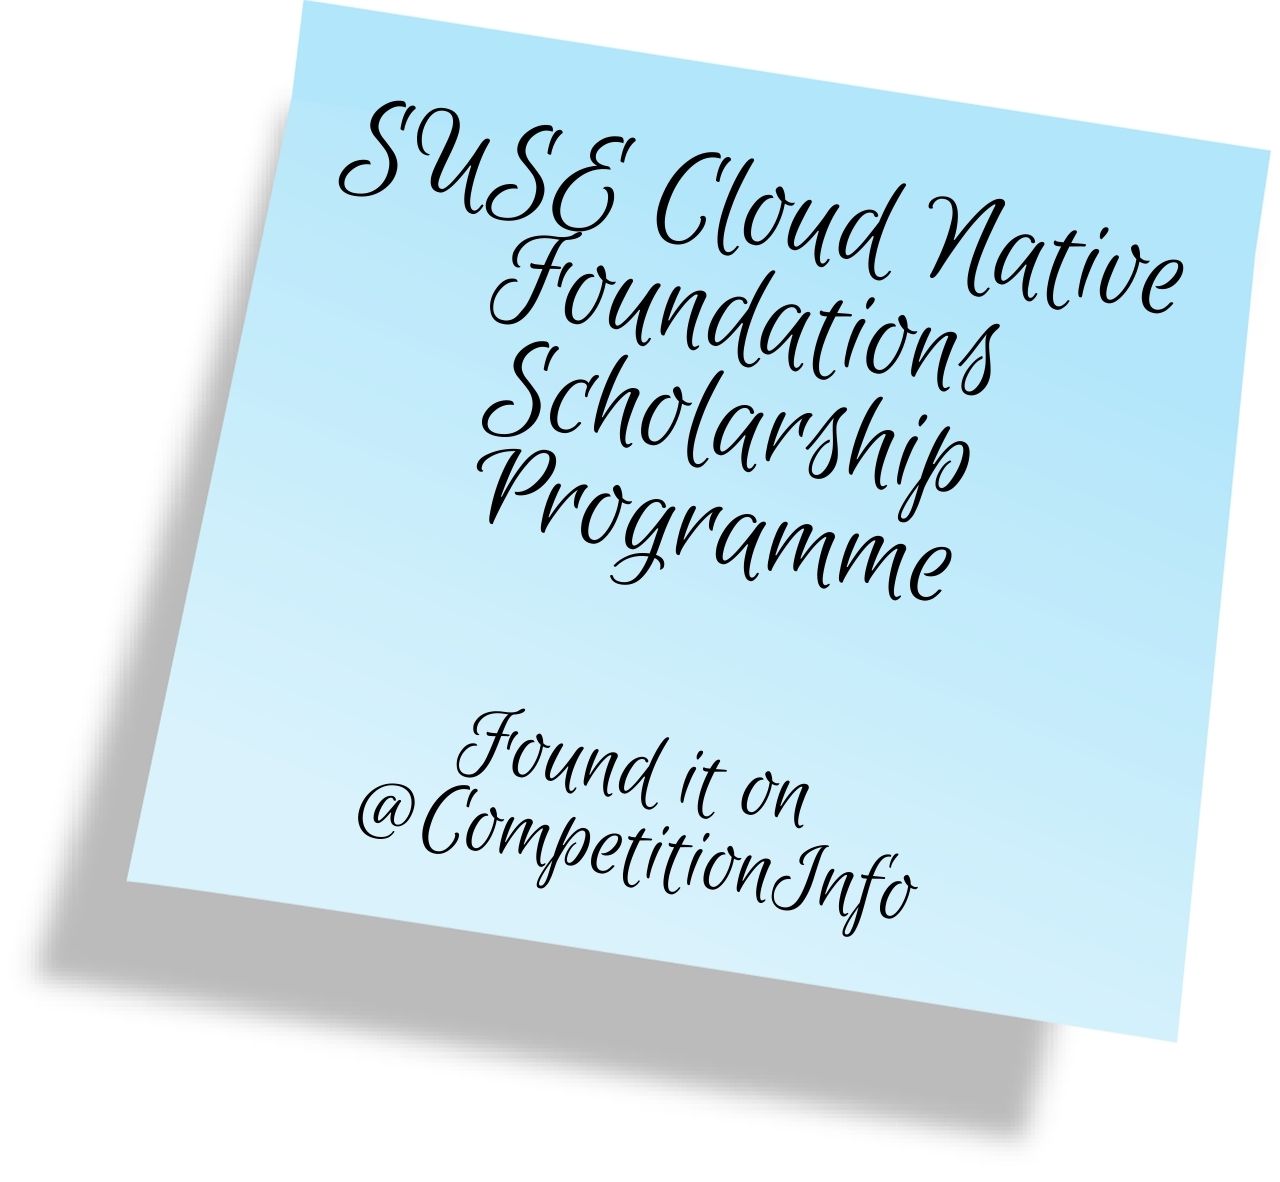 SUSE Cloud Native Foundations Scholarship Programme